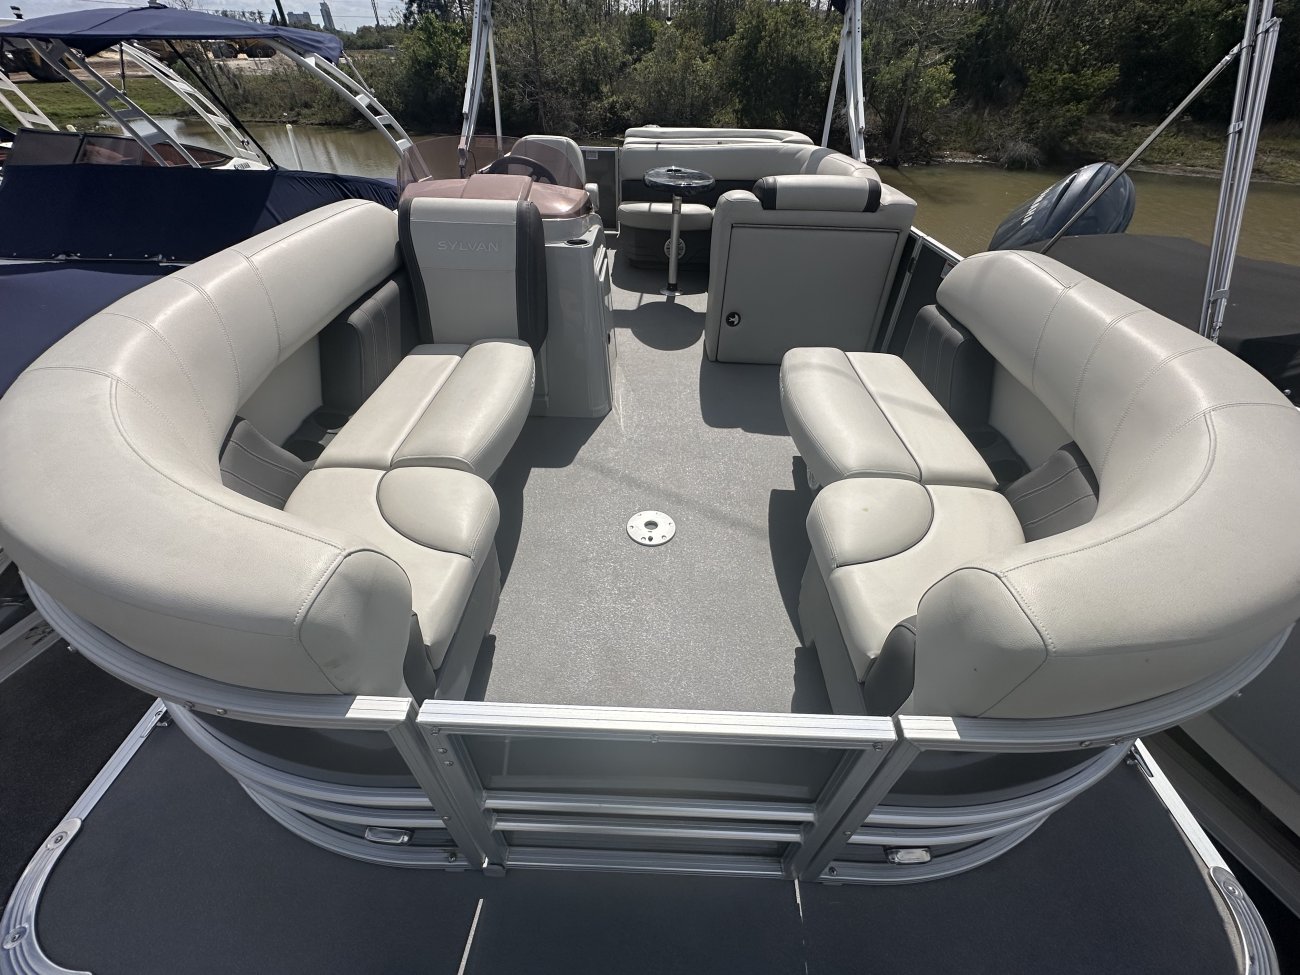 A pontoon boat is constructed from closed cylinders that support a platform. They offer the best value in terms of capacity to price. As a result pontoons are typically purchased for pleasure boating rather than serious fishing.